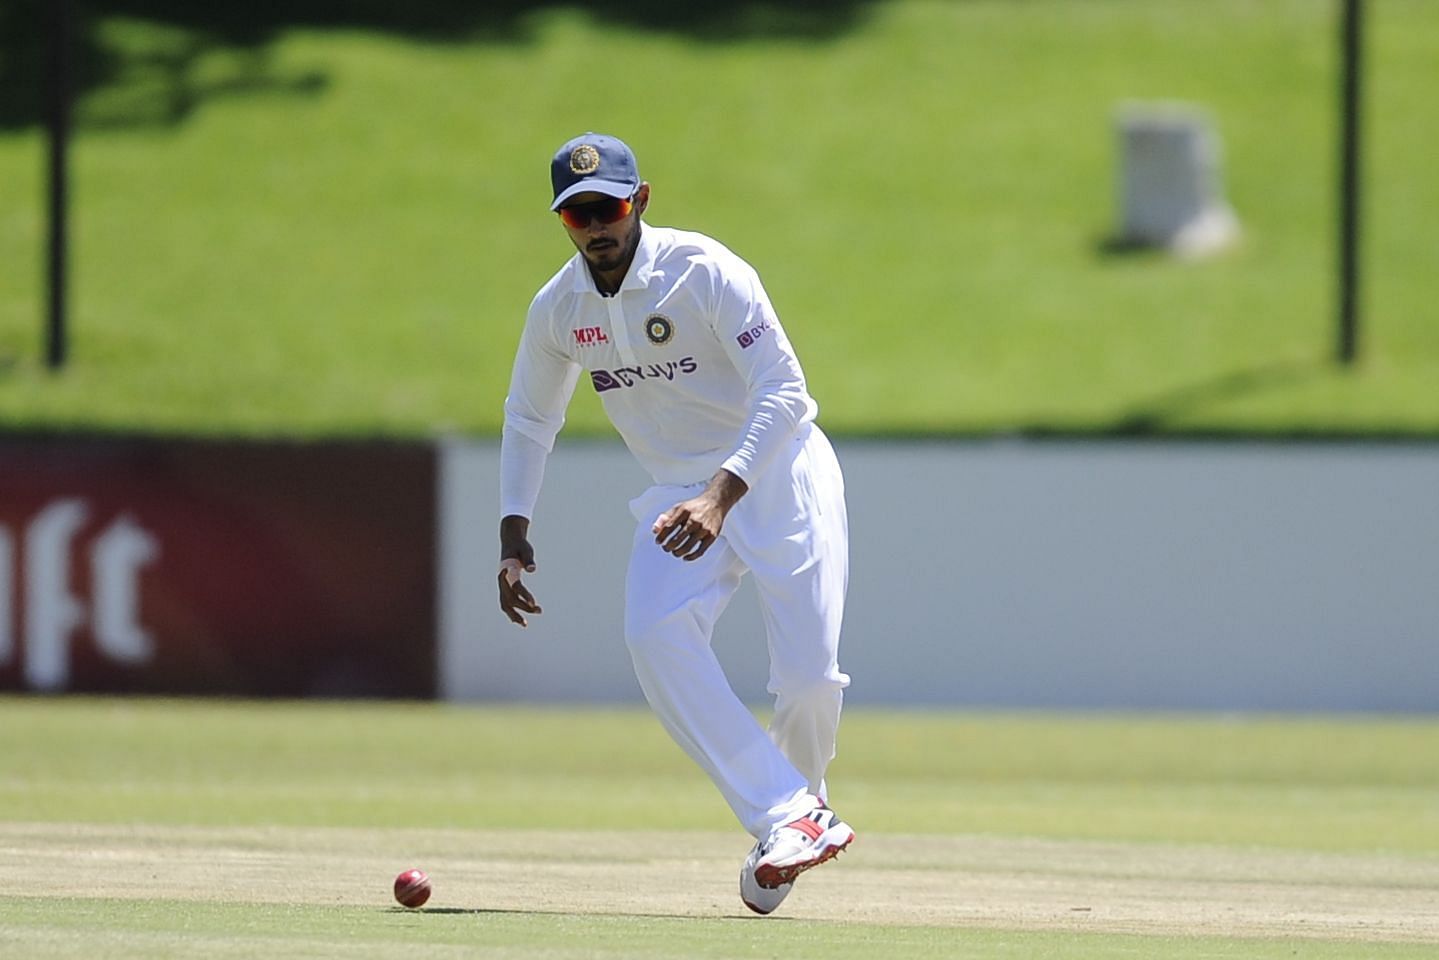 2nd Four-Day Tour Match: South Africa A v India A - Day 1